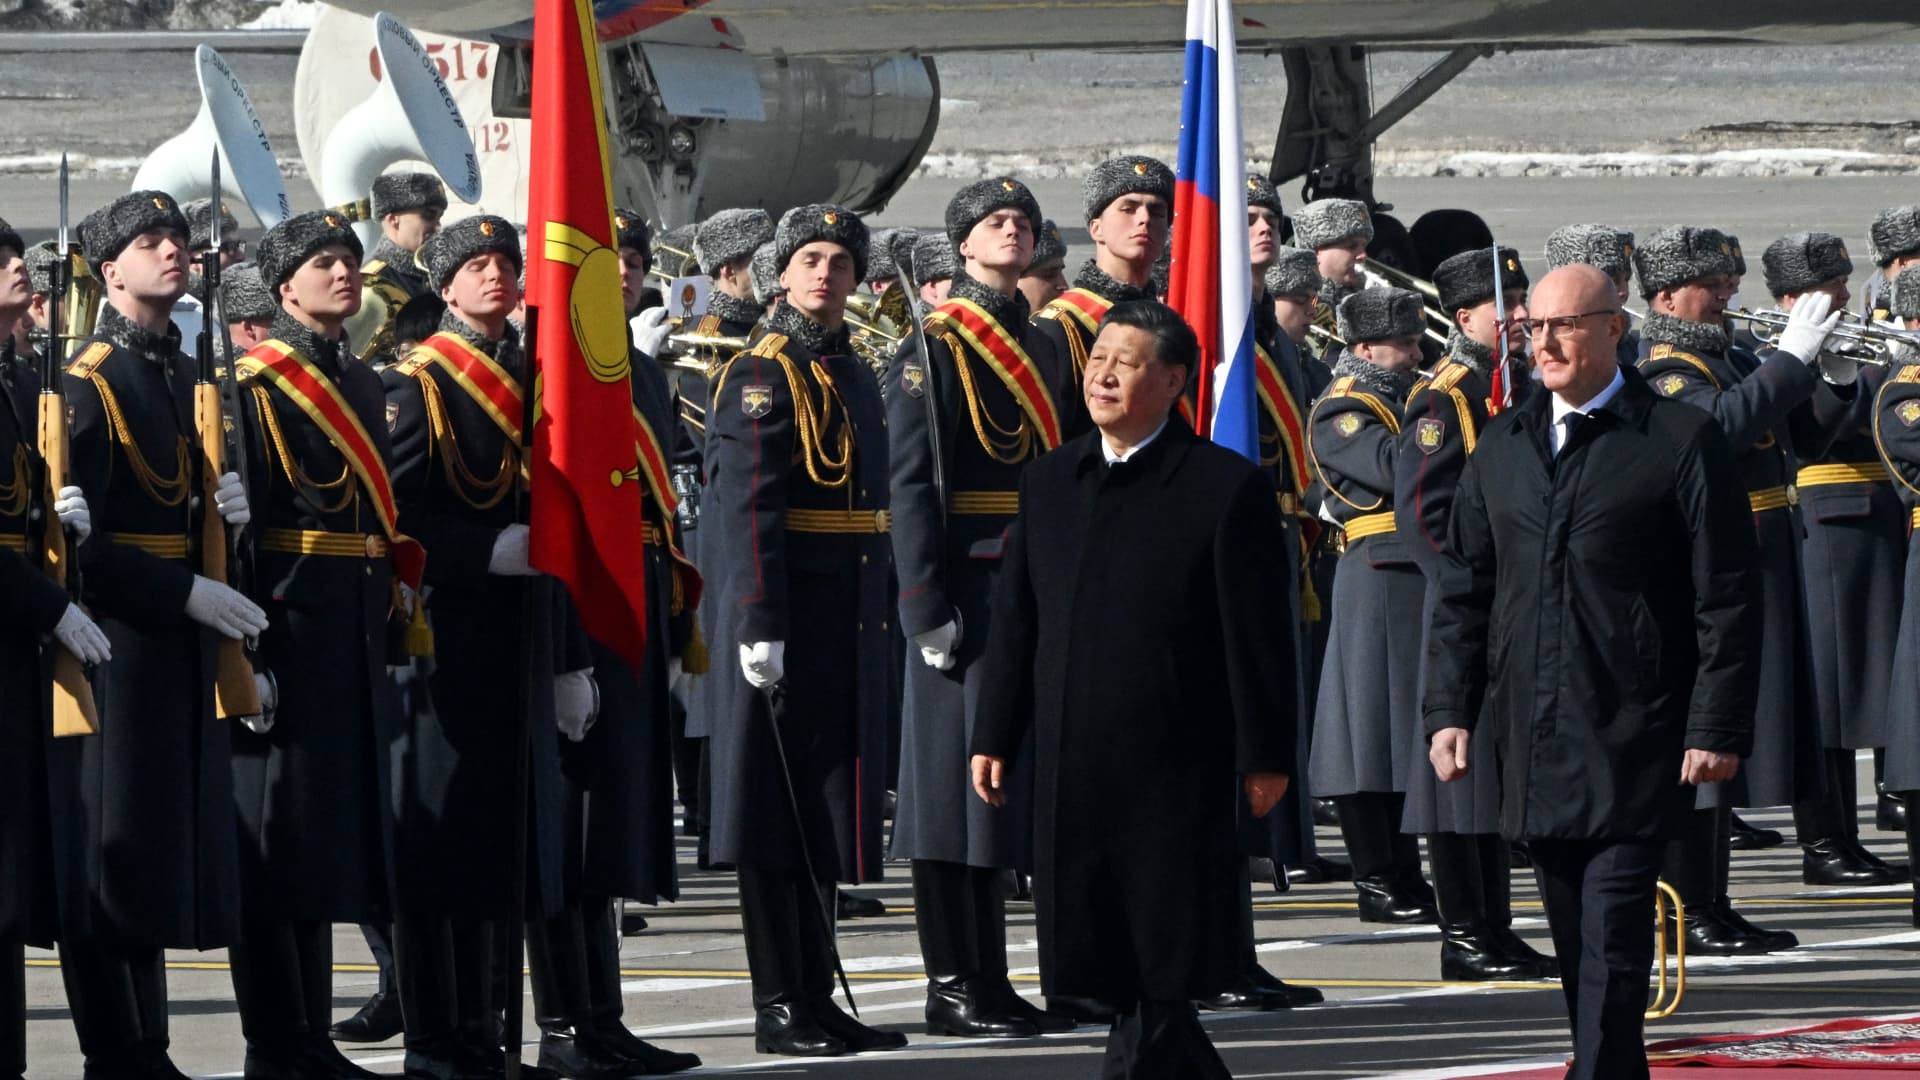 China's President Xi Jinping, accompanied by Russian Deputy Prime Minister Dmitry Chernyshenko, walks past honour guards during a welcoming ceremony at Moscow's Vnukovo airport on March 20, 2023.